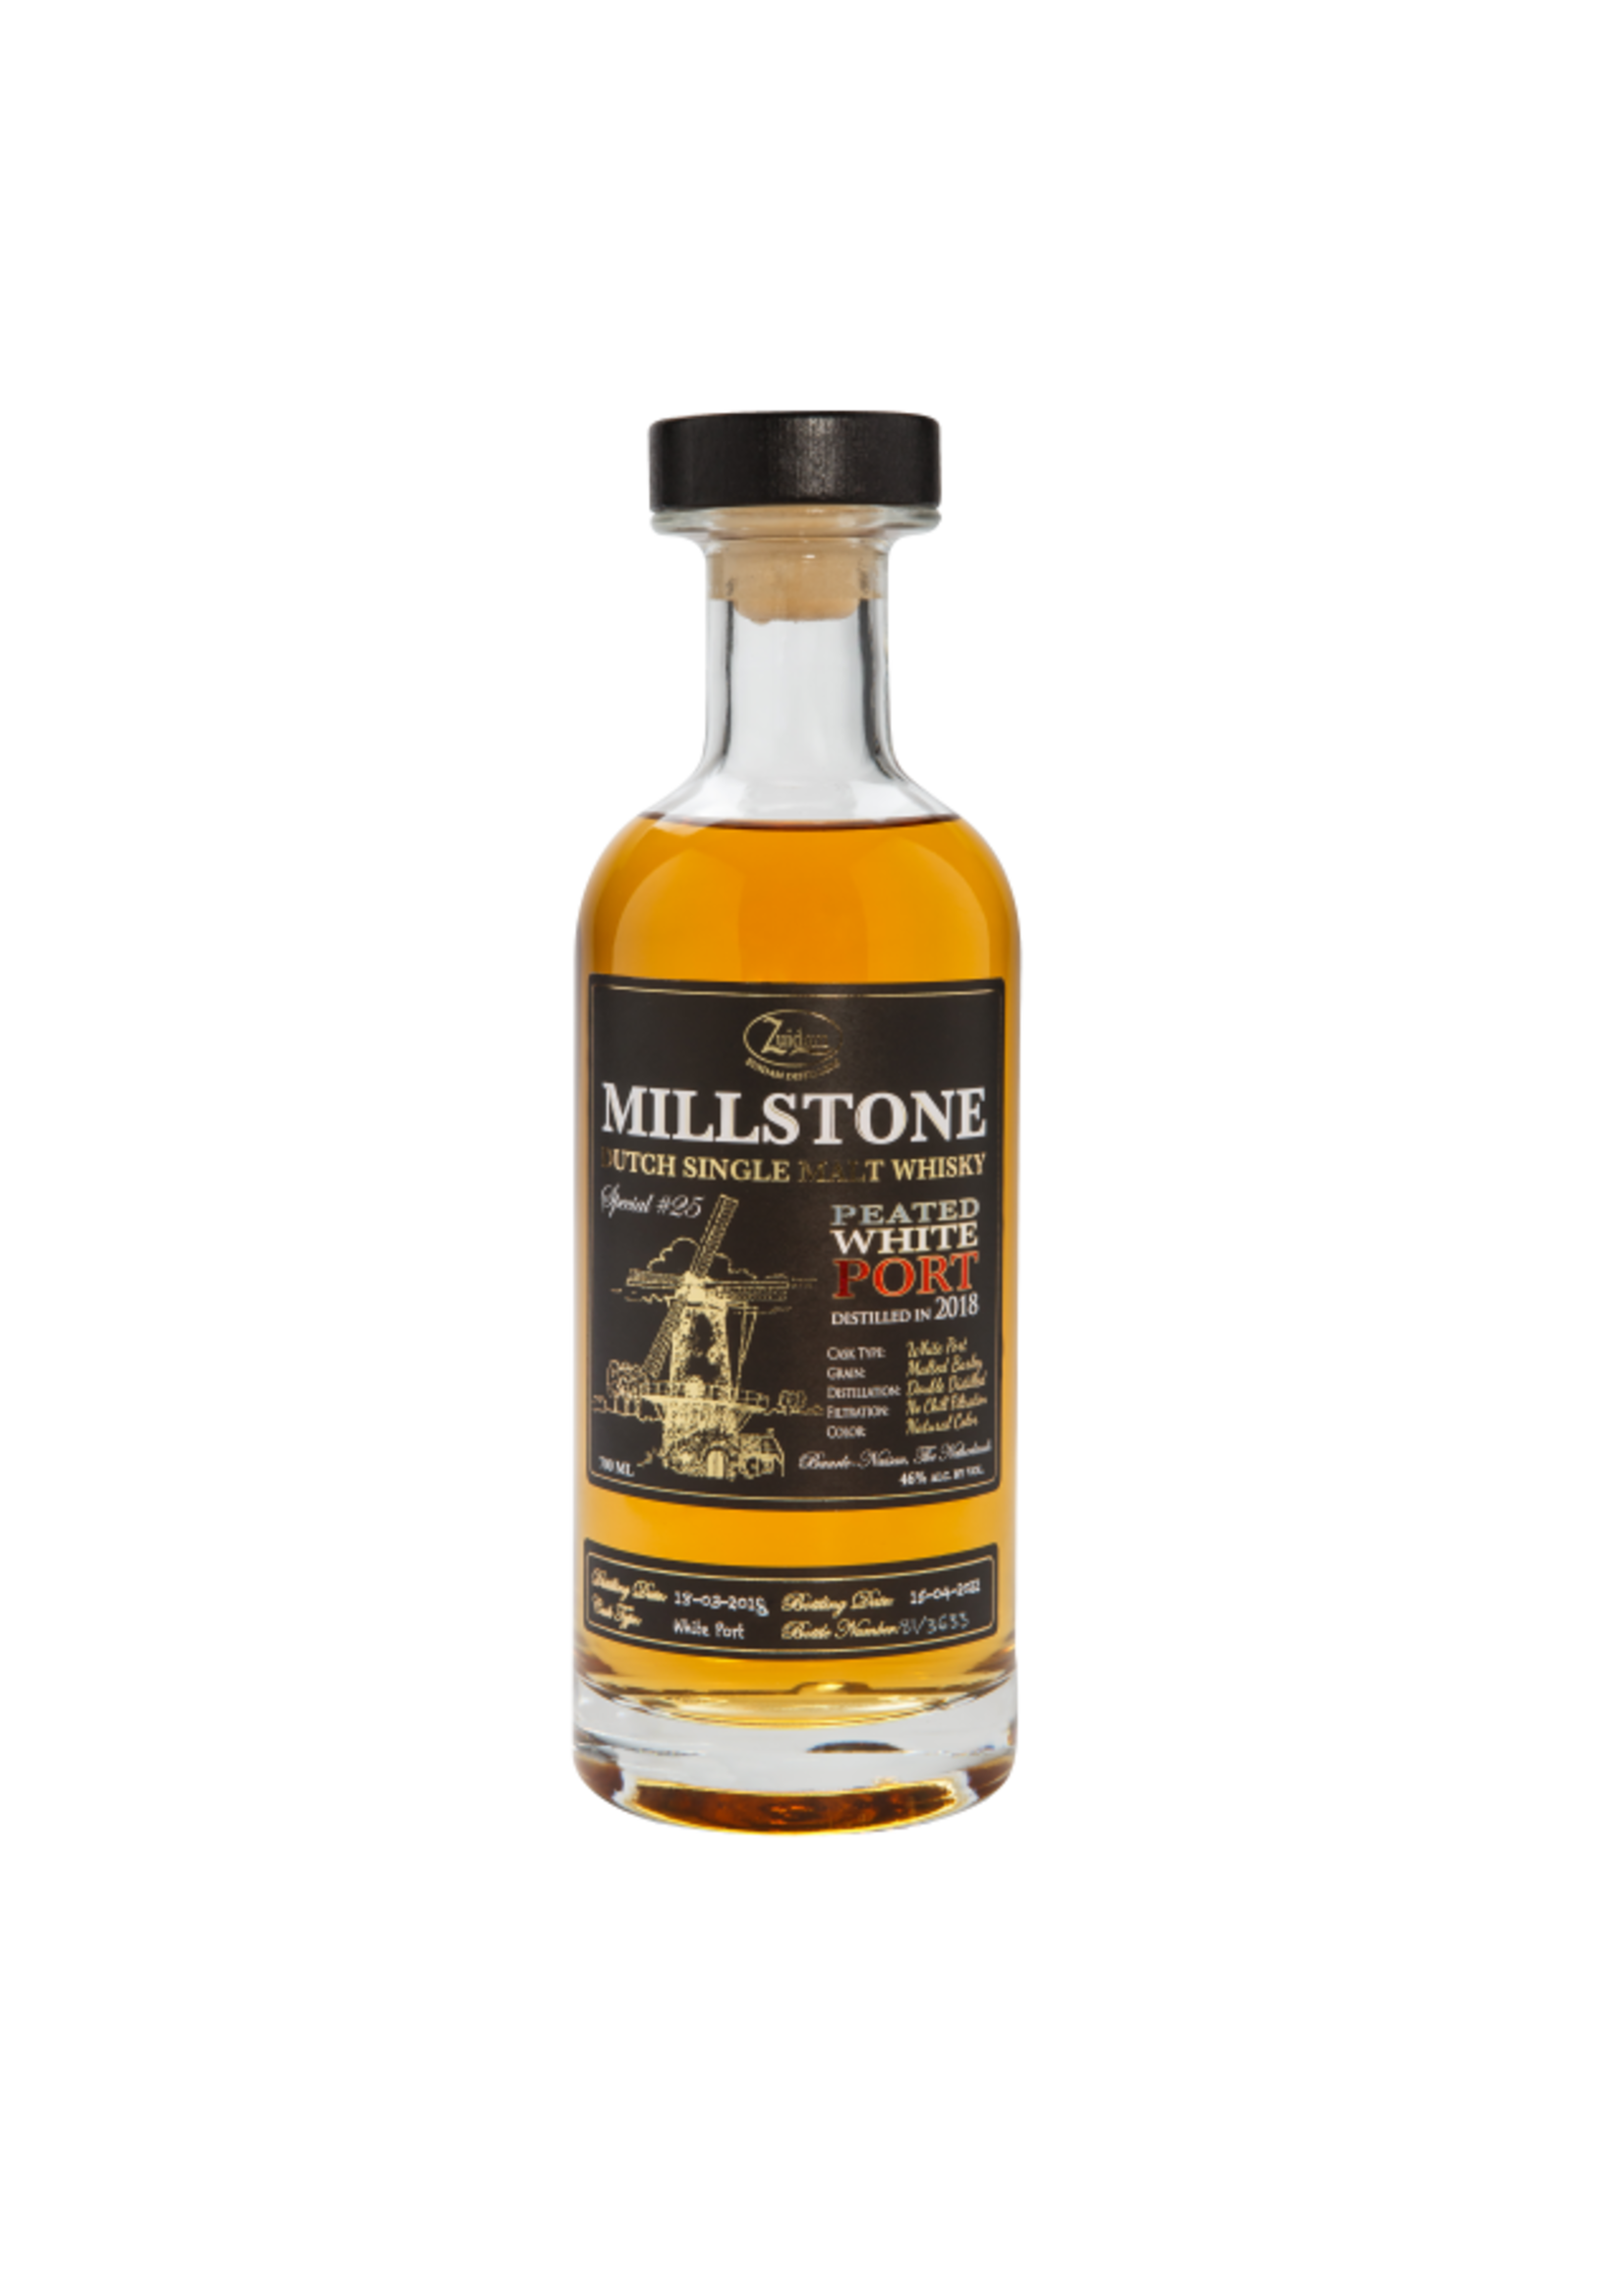 Zuidam Millstone Special # 25 Peated White Port 70 cl